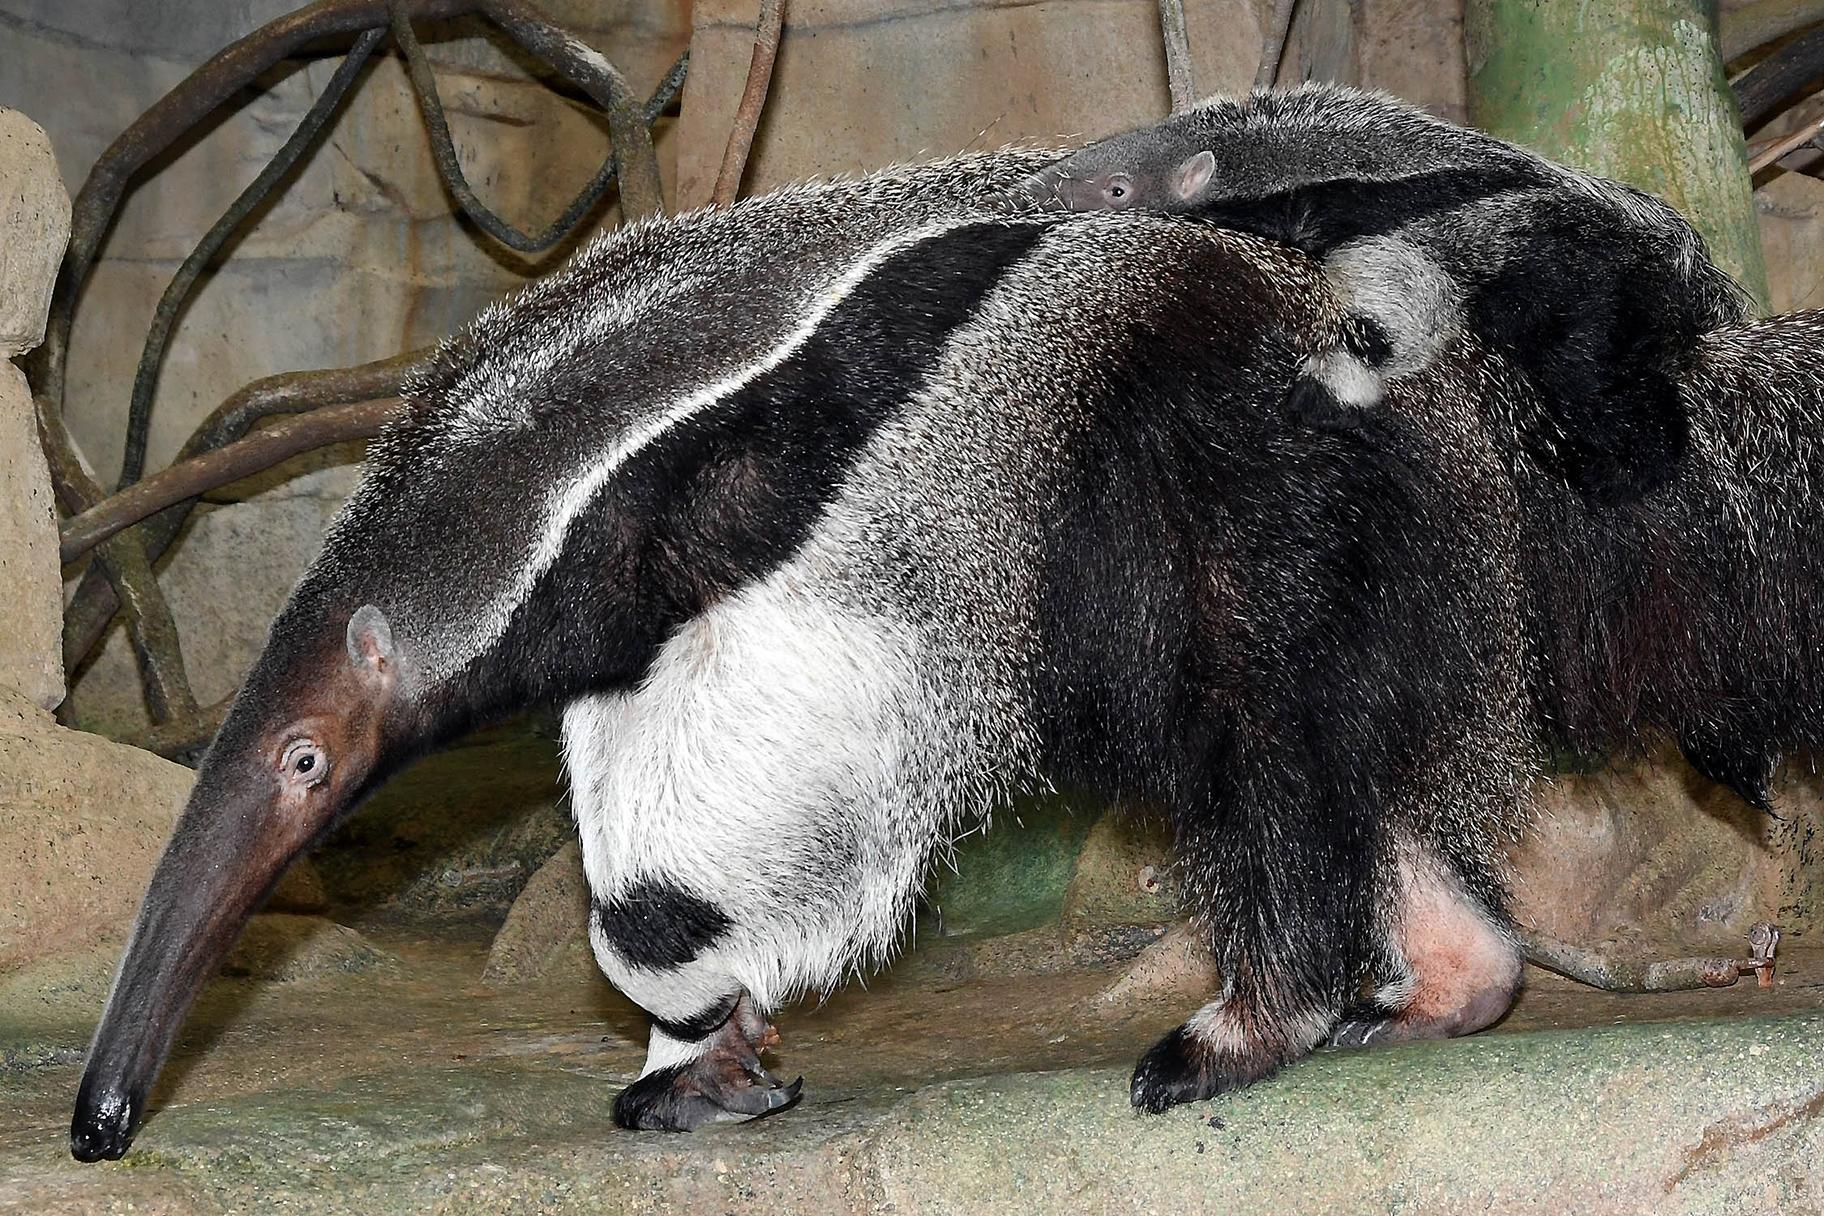 A newborn giant anteater born in December can be seen with his mom, Tulum, in Brookfield Zoo’s “Tropic World: Africa” exhibit on select days. (Jim Schulz / Chicago Zoological Society)